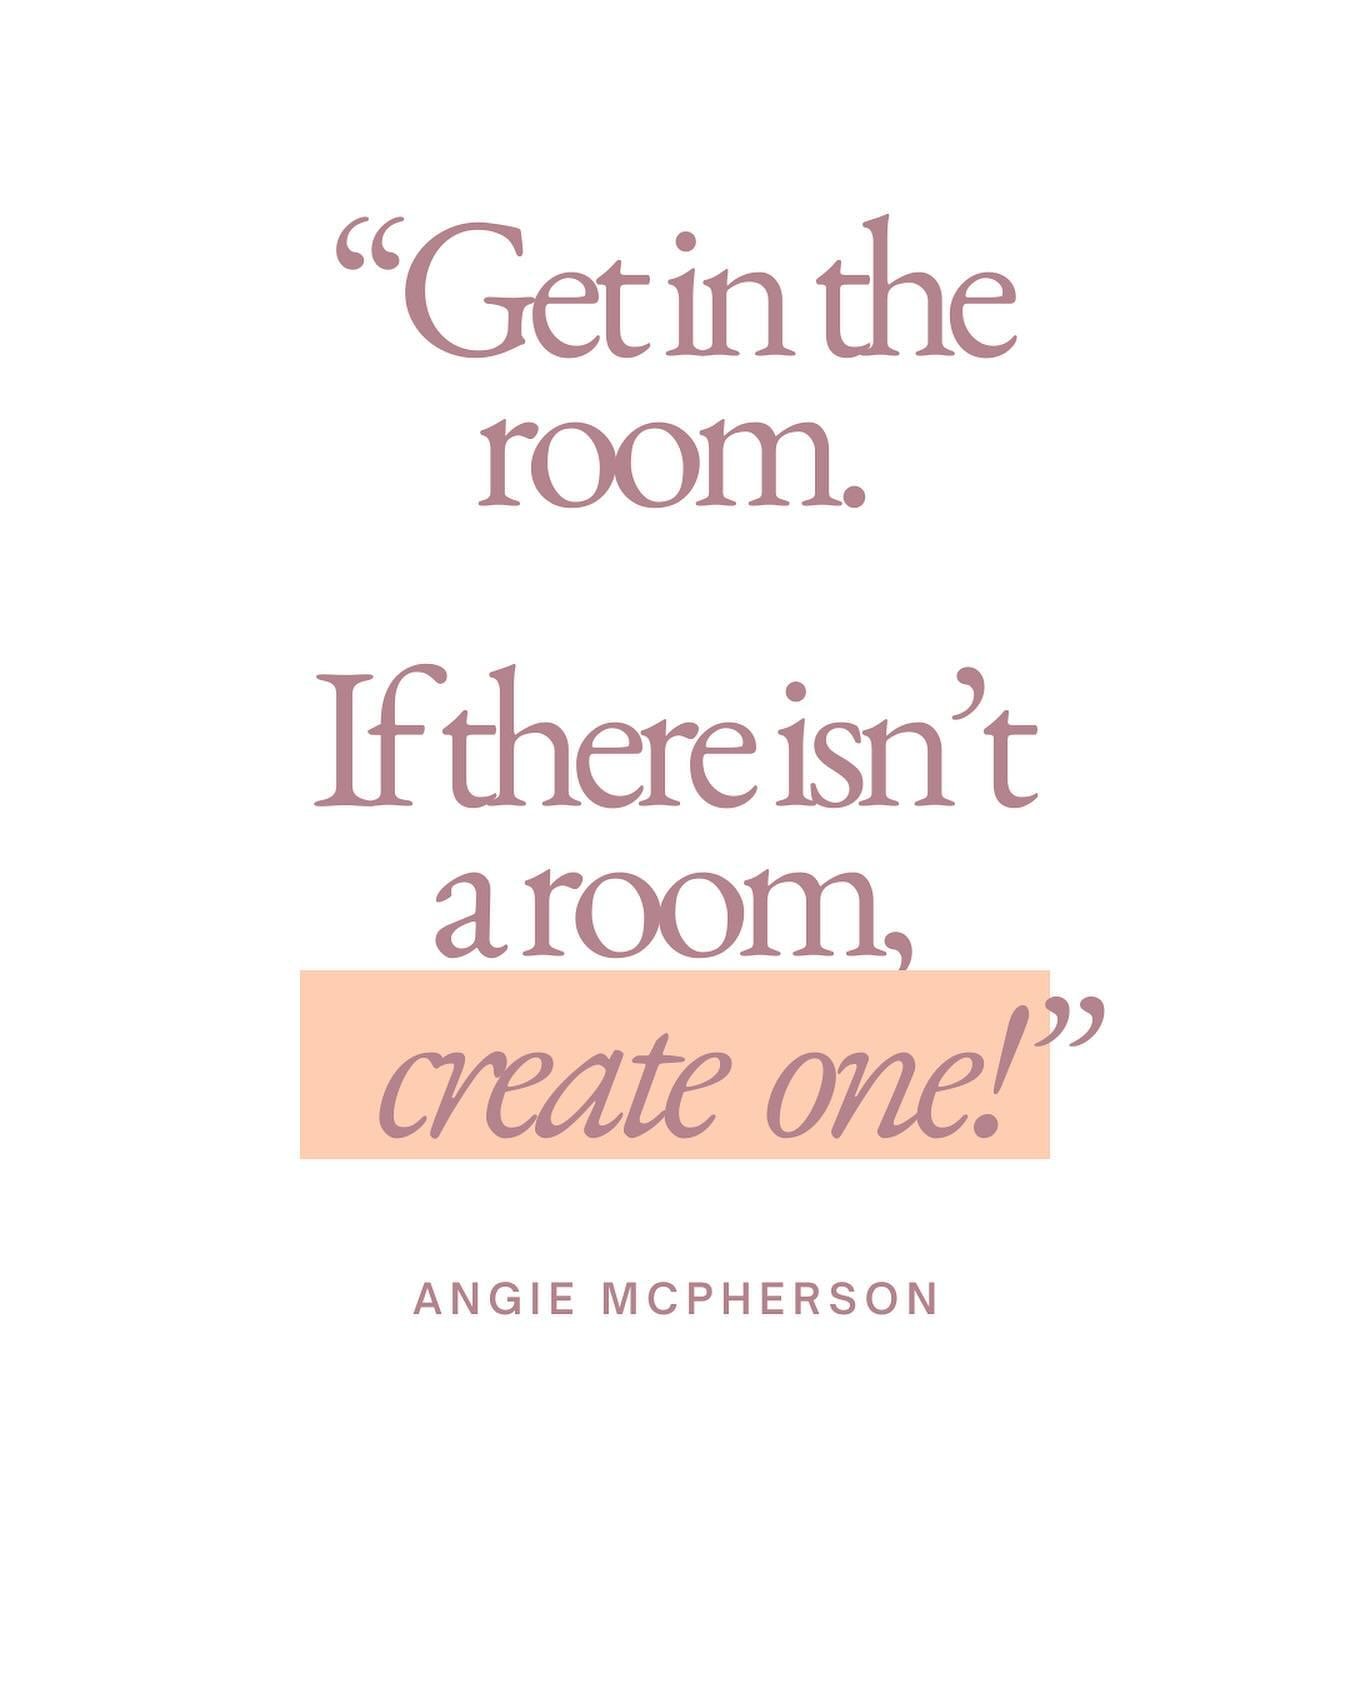 I first heard @angiejanine say this when I was in her mastermind last fall and it really stuck with me!

She stresses that as entrepreneurs, we should try  to get in the room, the space  or community that our ideal clients are in to genuinely make co